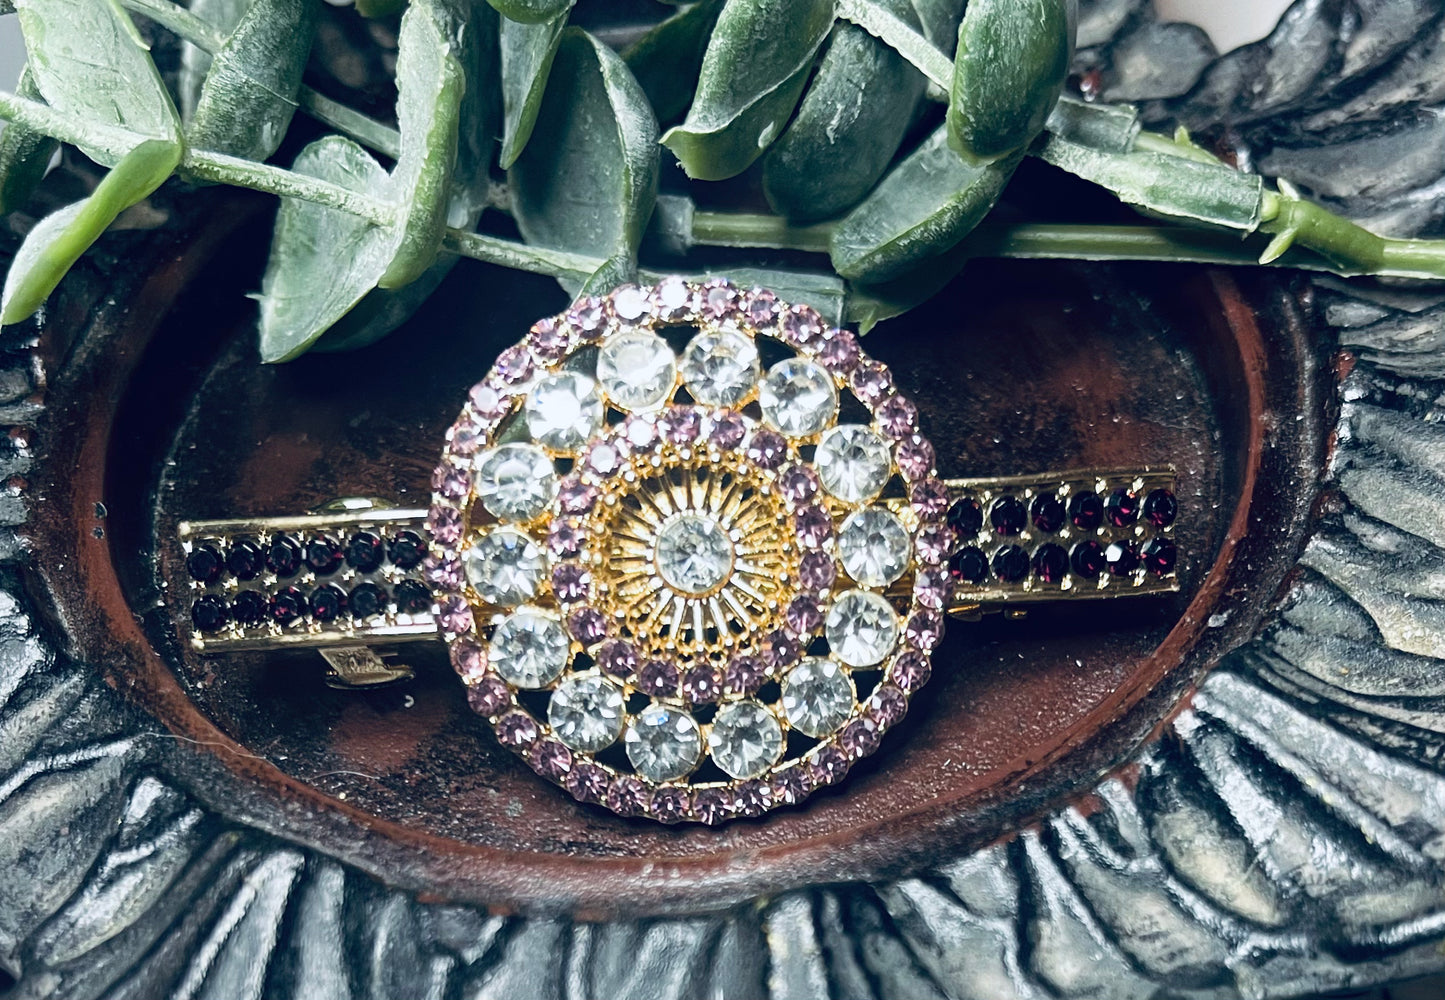 Purple pink round Crystal rhinestone barrette approximately 3.0” gold tone formal hair accessories gift wedding bridesmaid prom birthday mother of bride groom